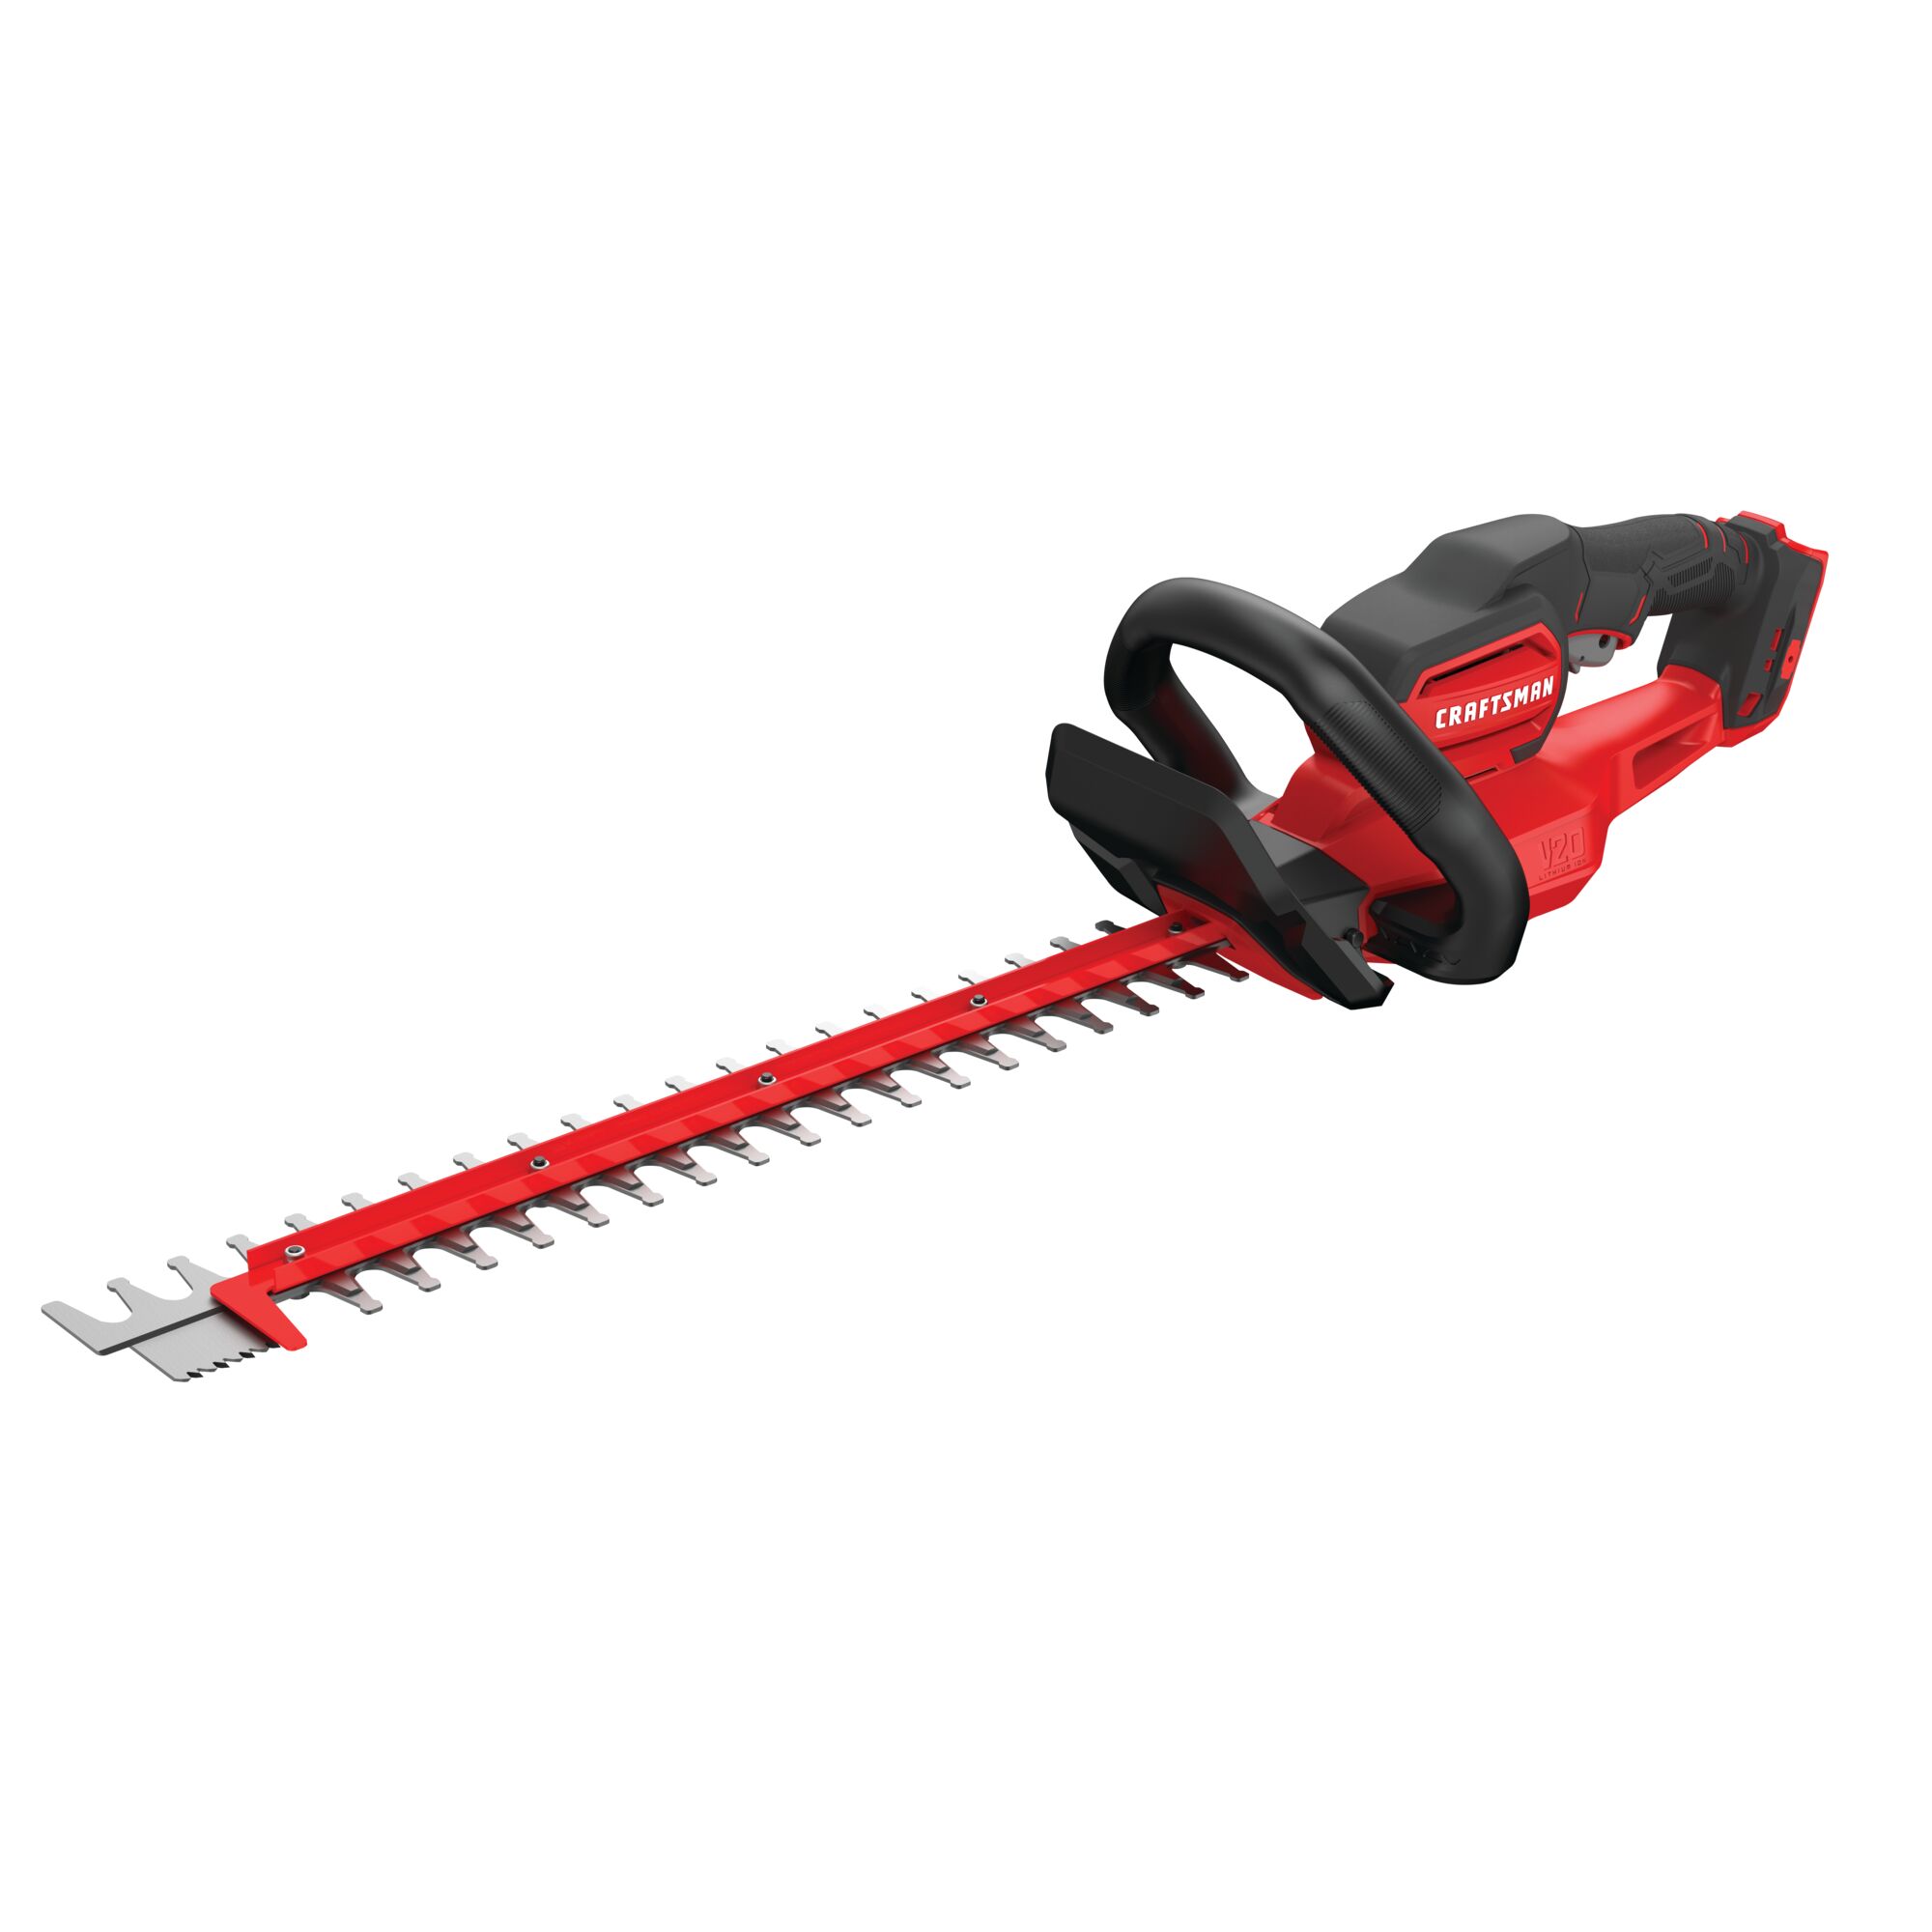 Cordless 22 inch hedge trimmer.